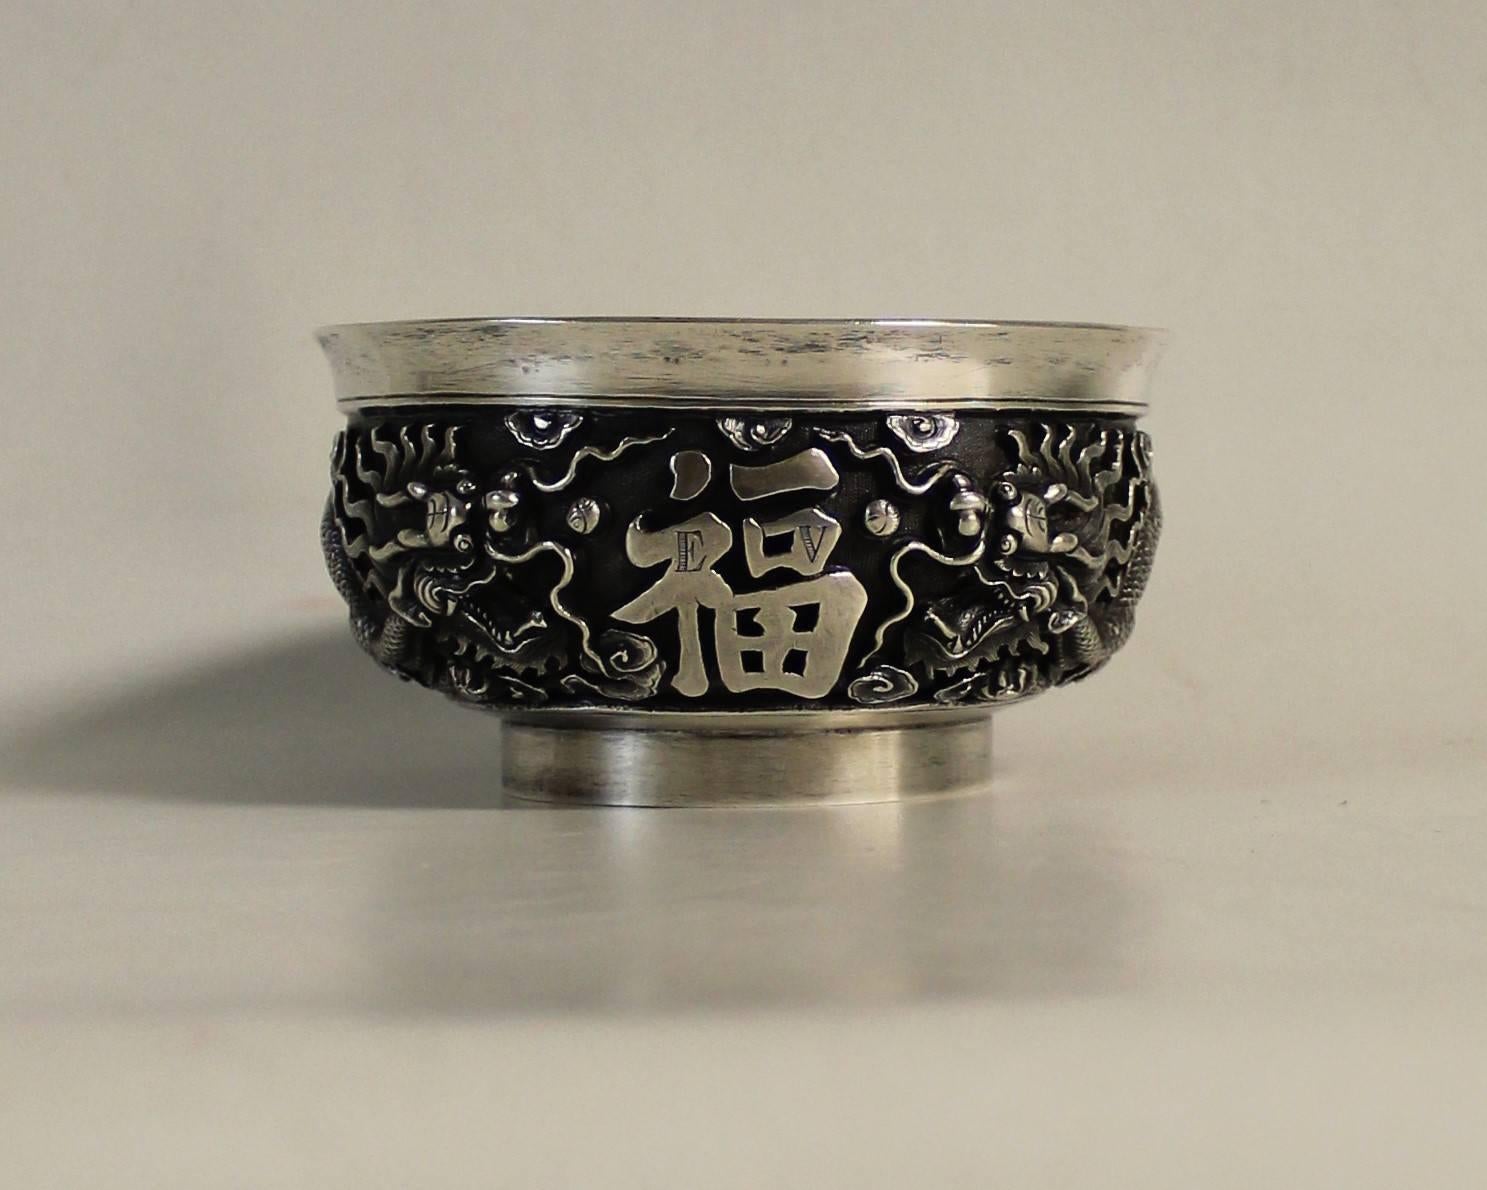 Asian 19th Century Chinese Export Silver Bowl, Plate & Seal Attributed to Tu Mao Xing